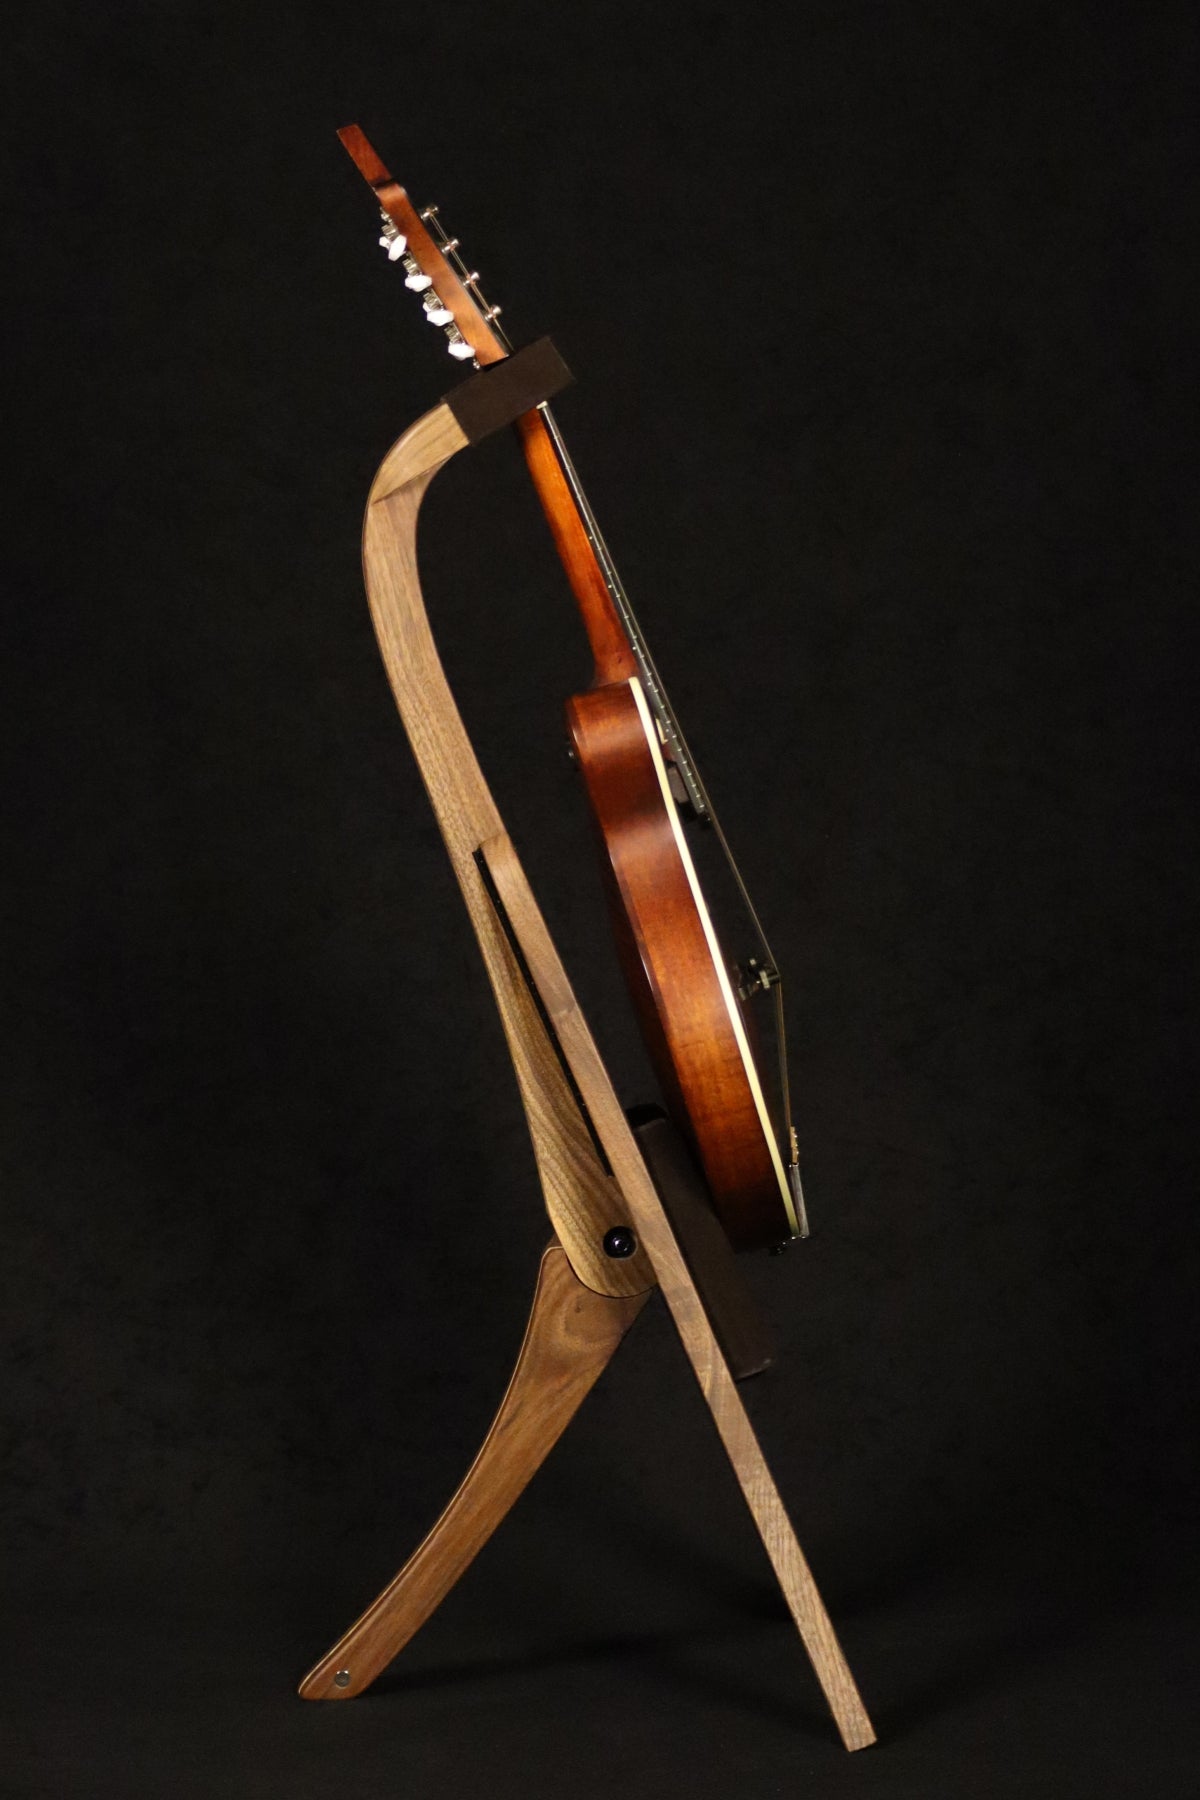 Folding walnut and curly maple wood mandolin floor stand full side image with Eastman mandolin